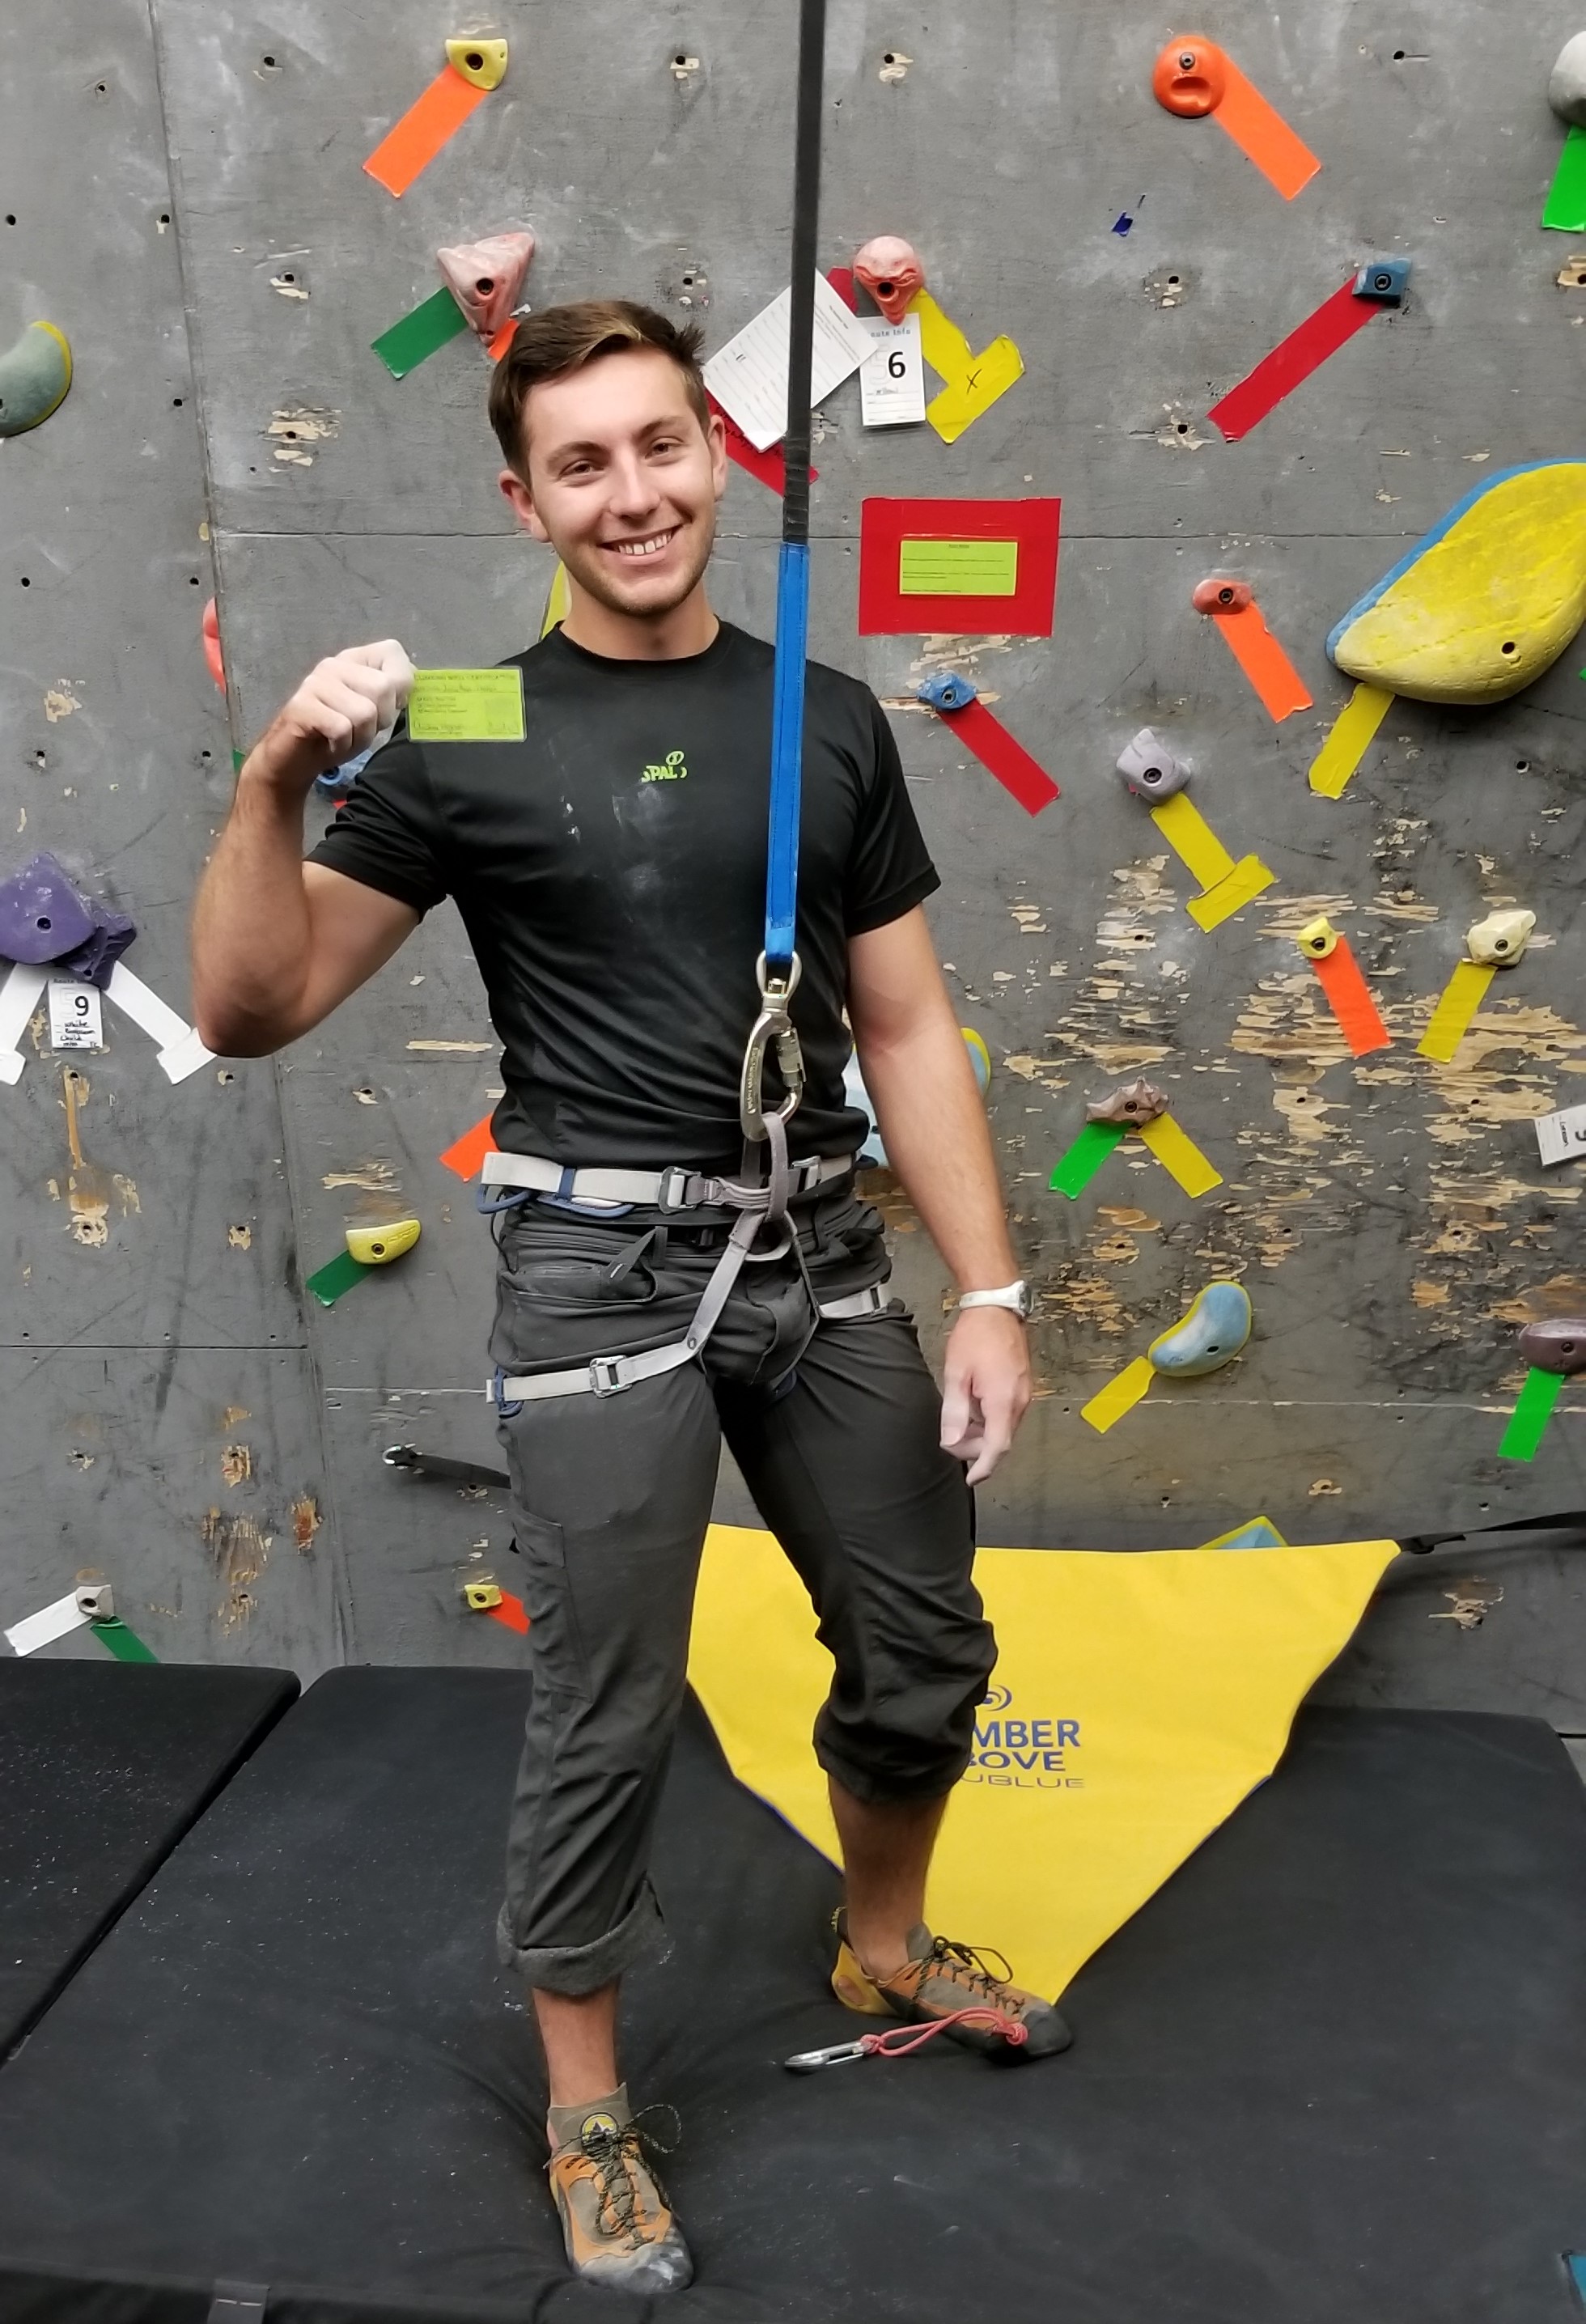 rock climbing - How do you tie in to the centre of a rope? - The